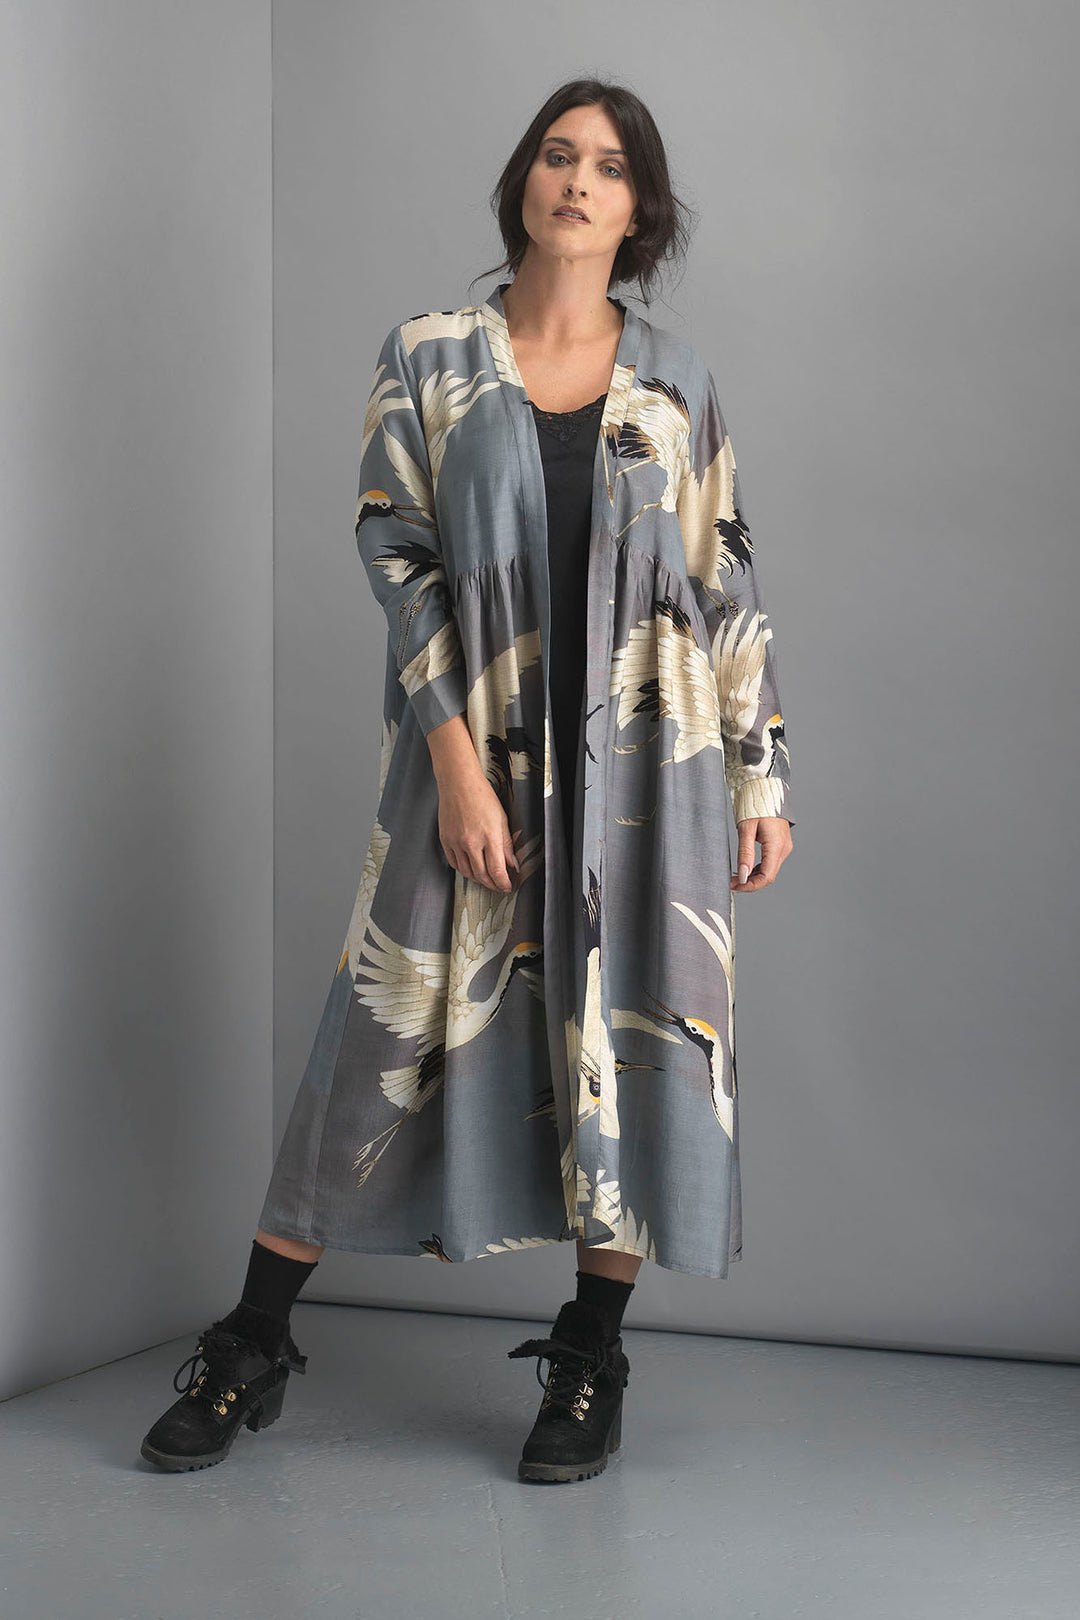 One Hundred Stars Stork Slate Grey Duster Coat- This stunning shape is both stylish and versatile, whether you choose to wear our duster coat as a luxurious house coat, as part of a chic ensemble during the day or over a little black dress during the evening.